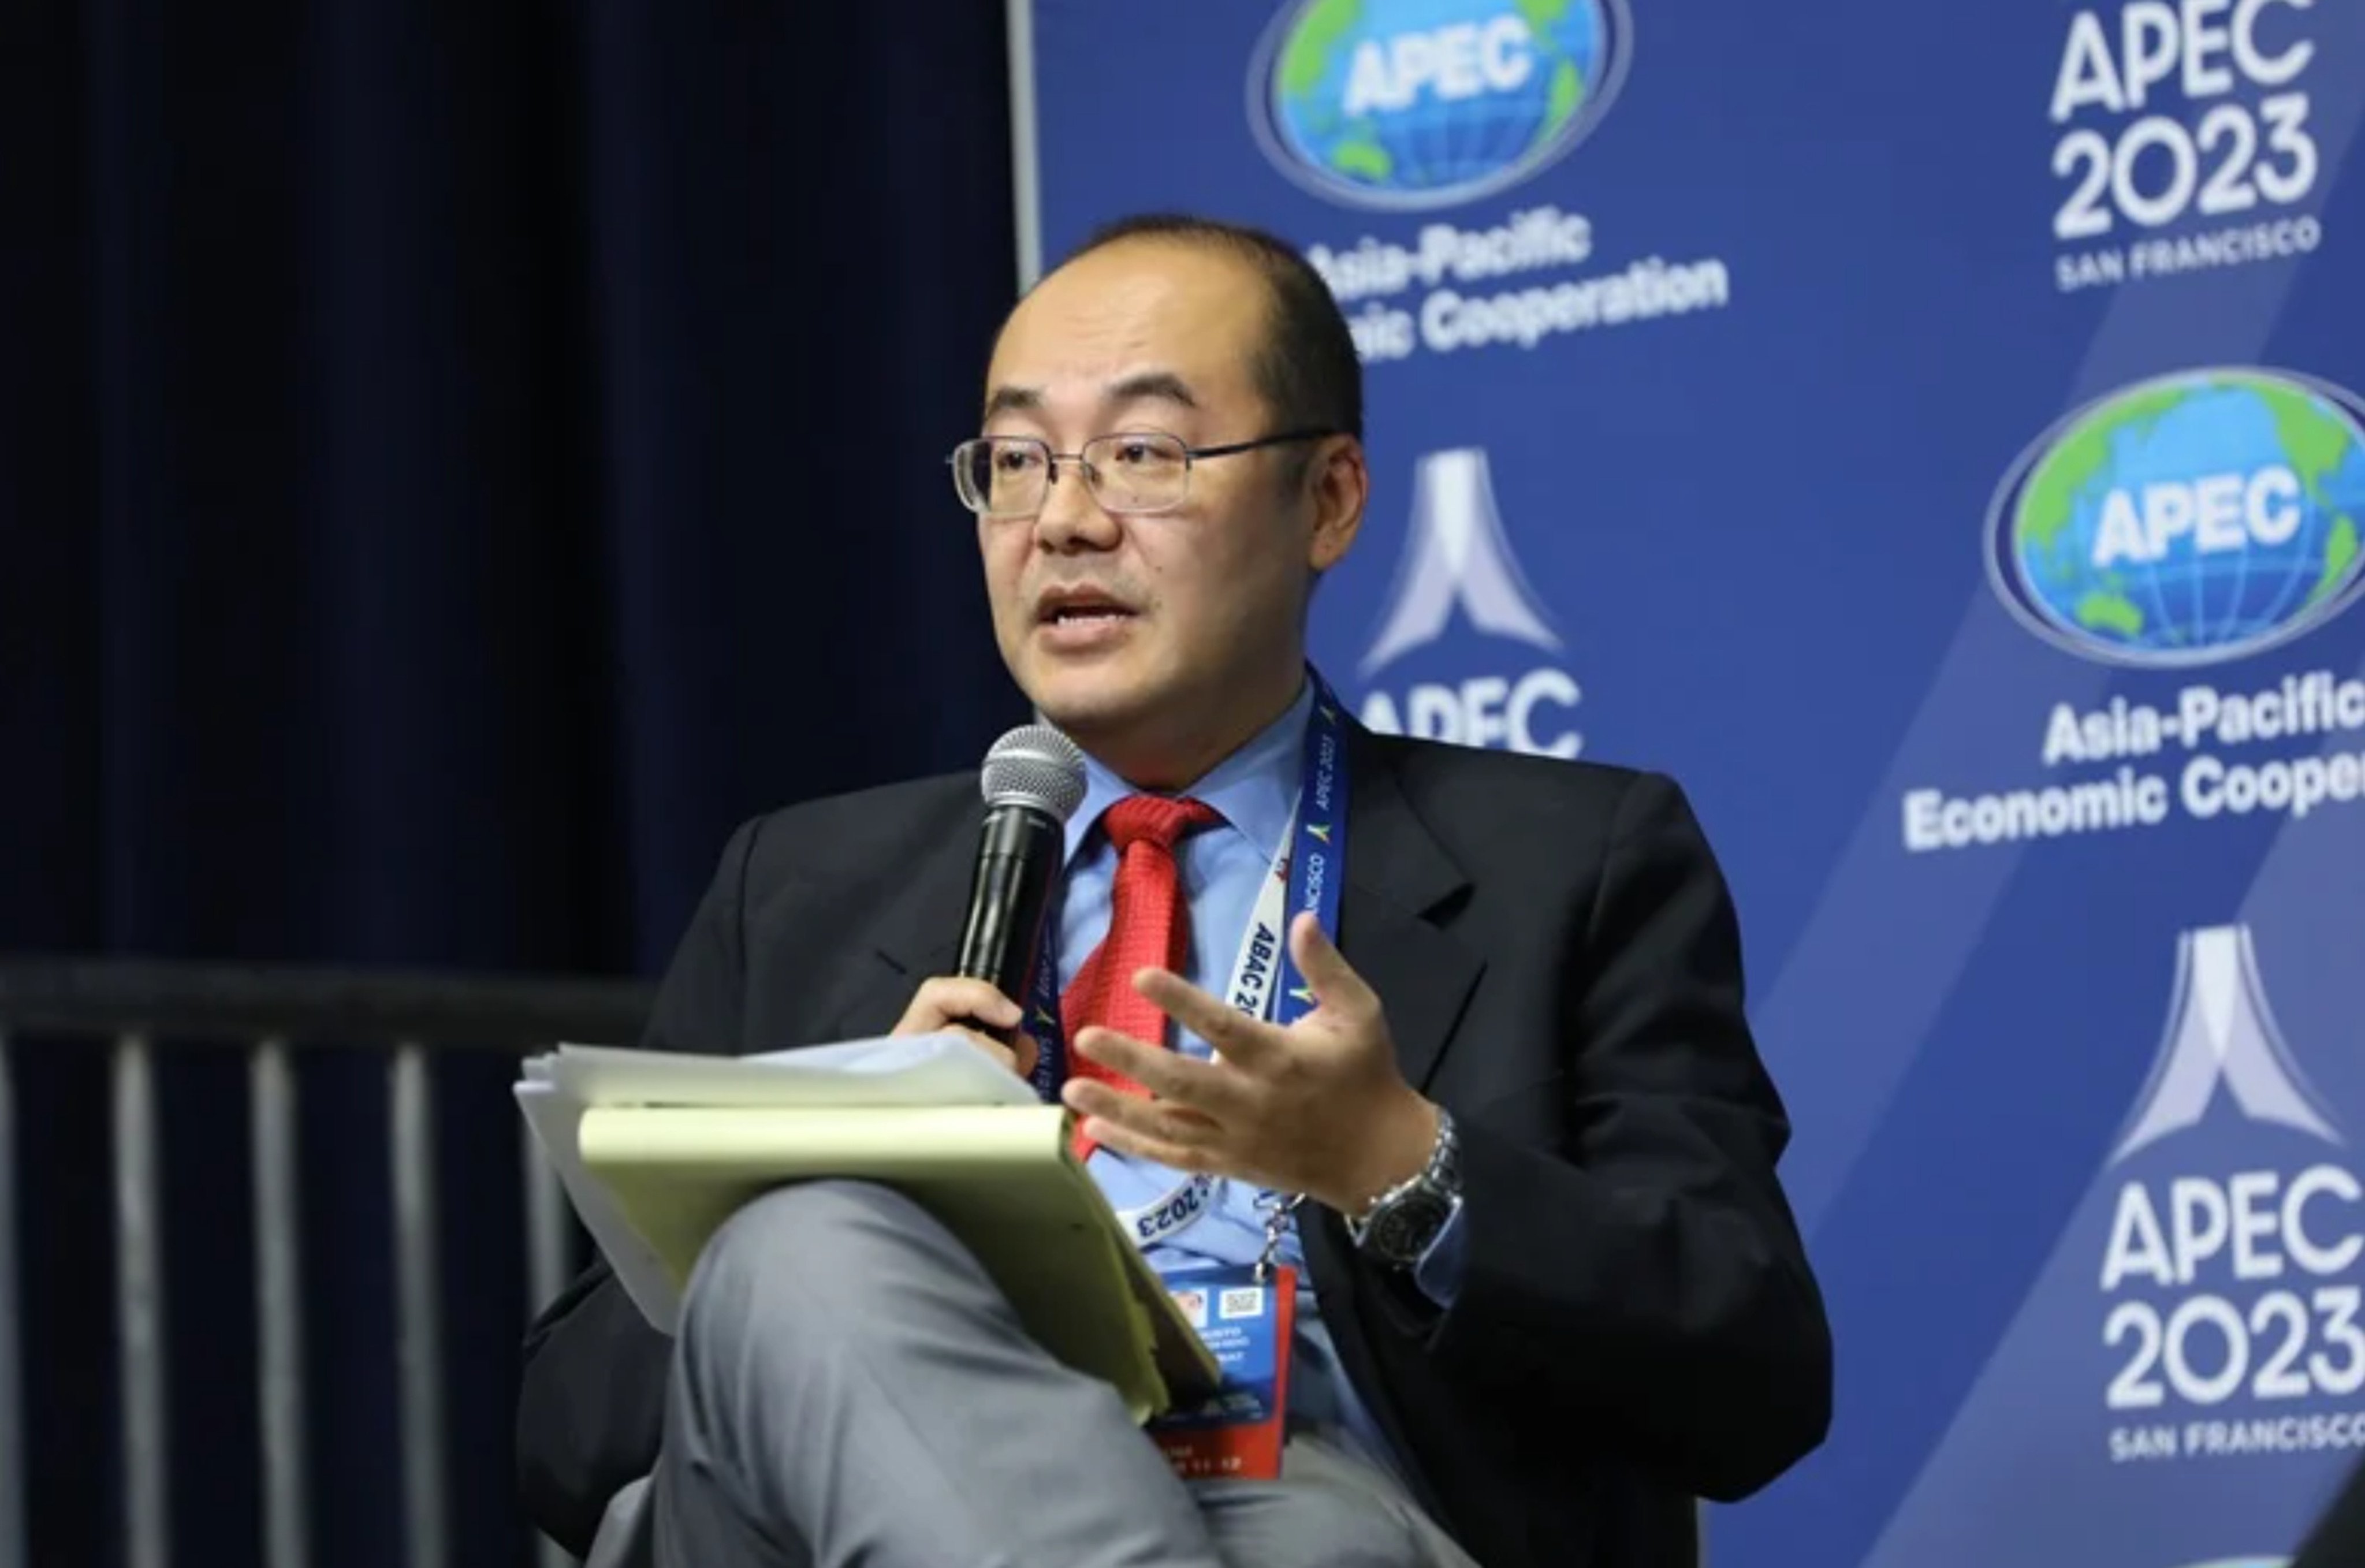 Carlos Kuriyama, director of Apec’s Singapore-based research arm, at the 21-country summit in California on Sunday. Photo: Apec